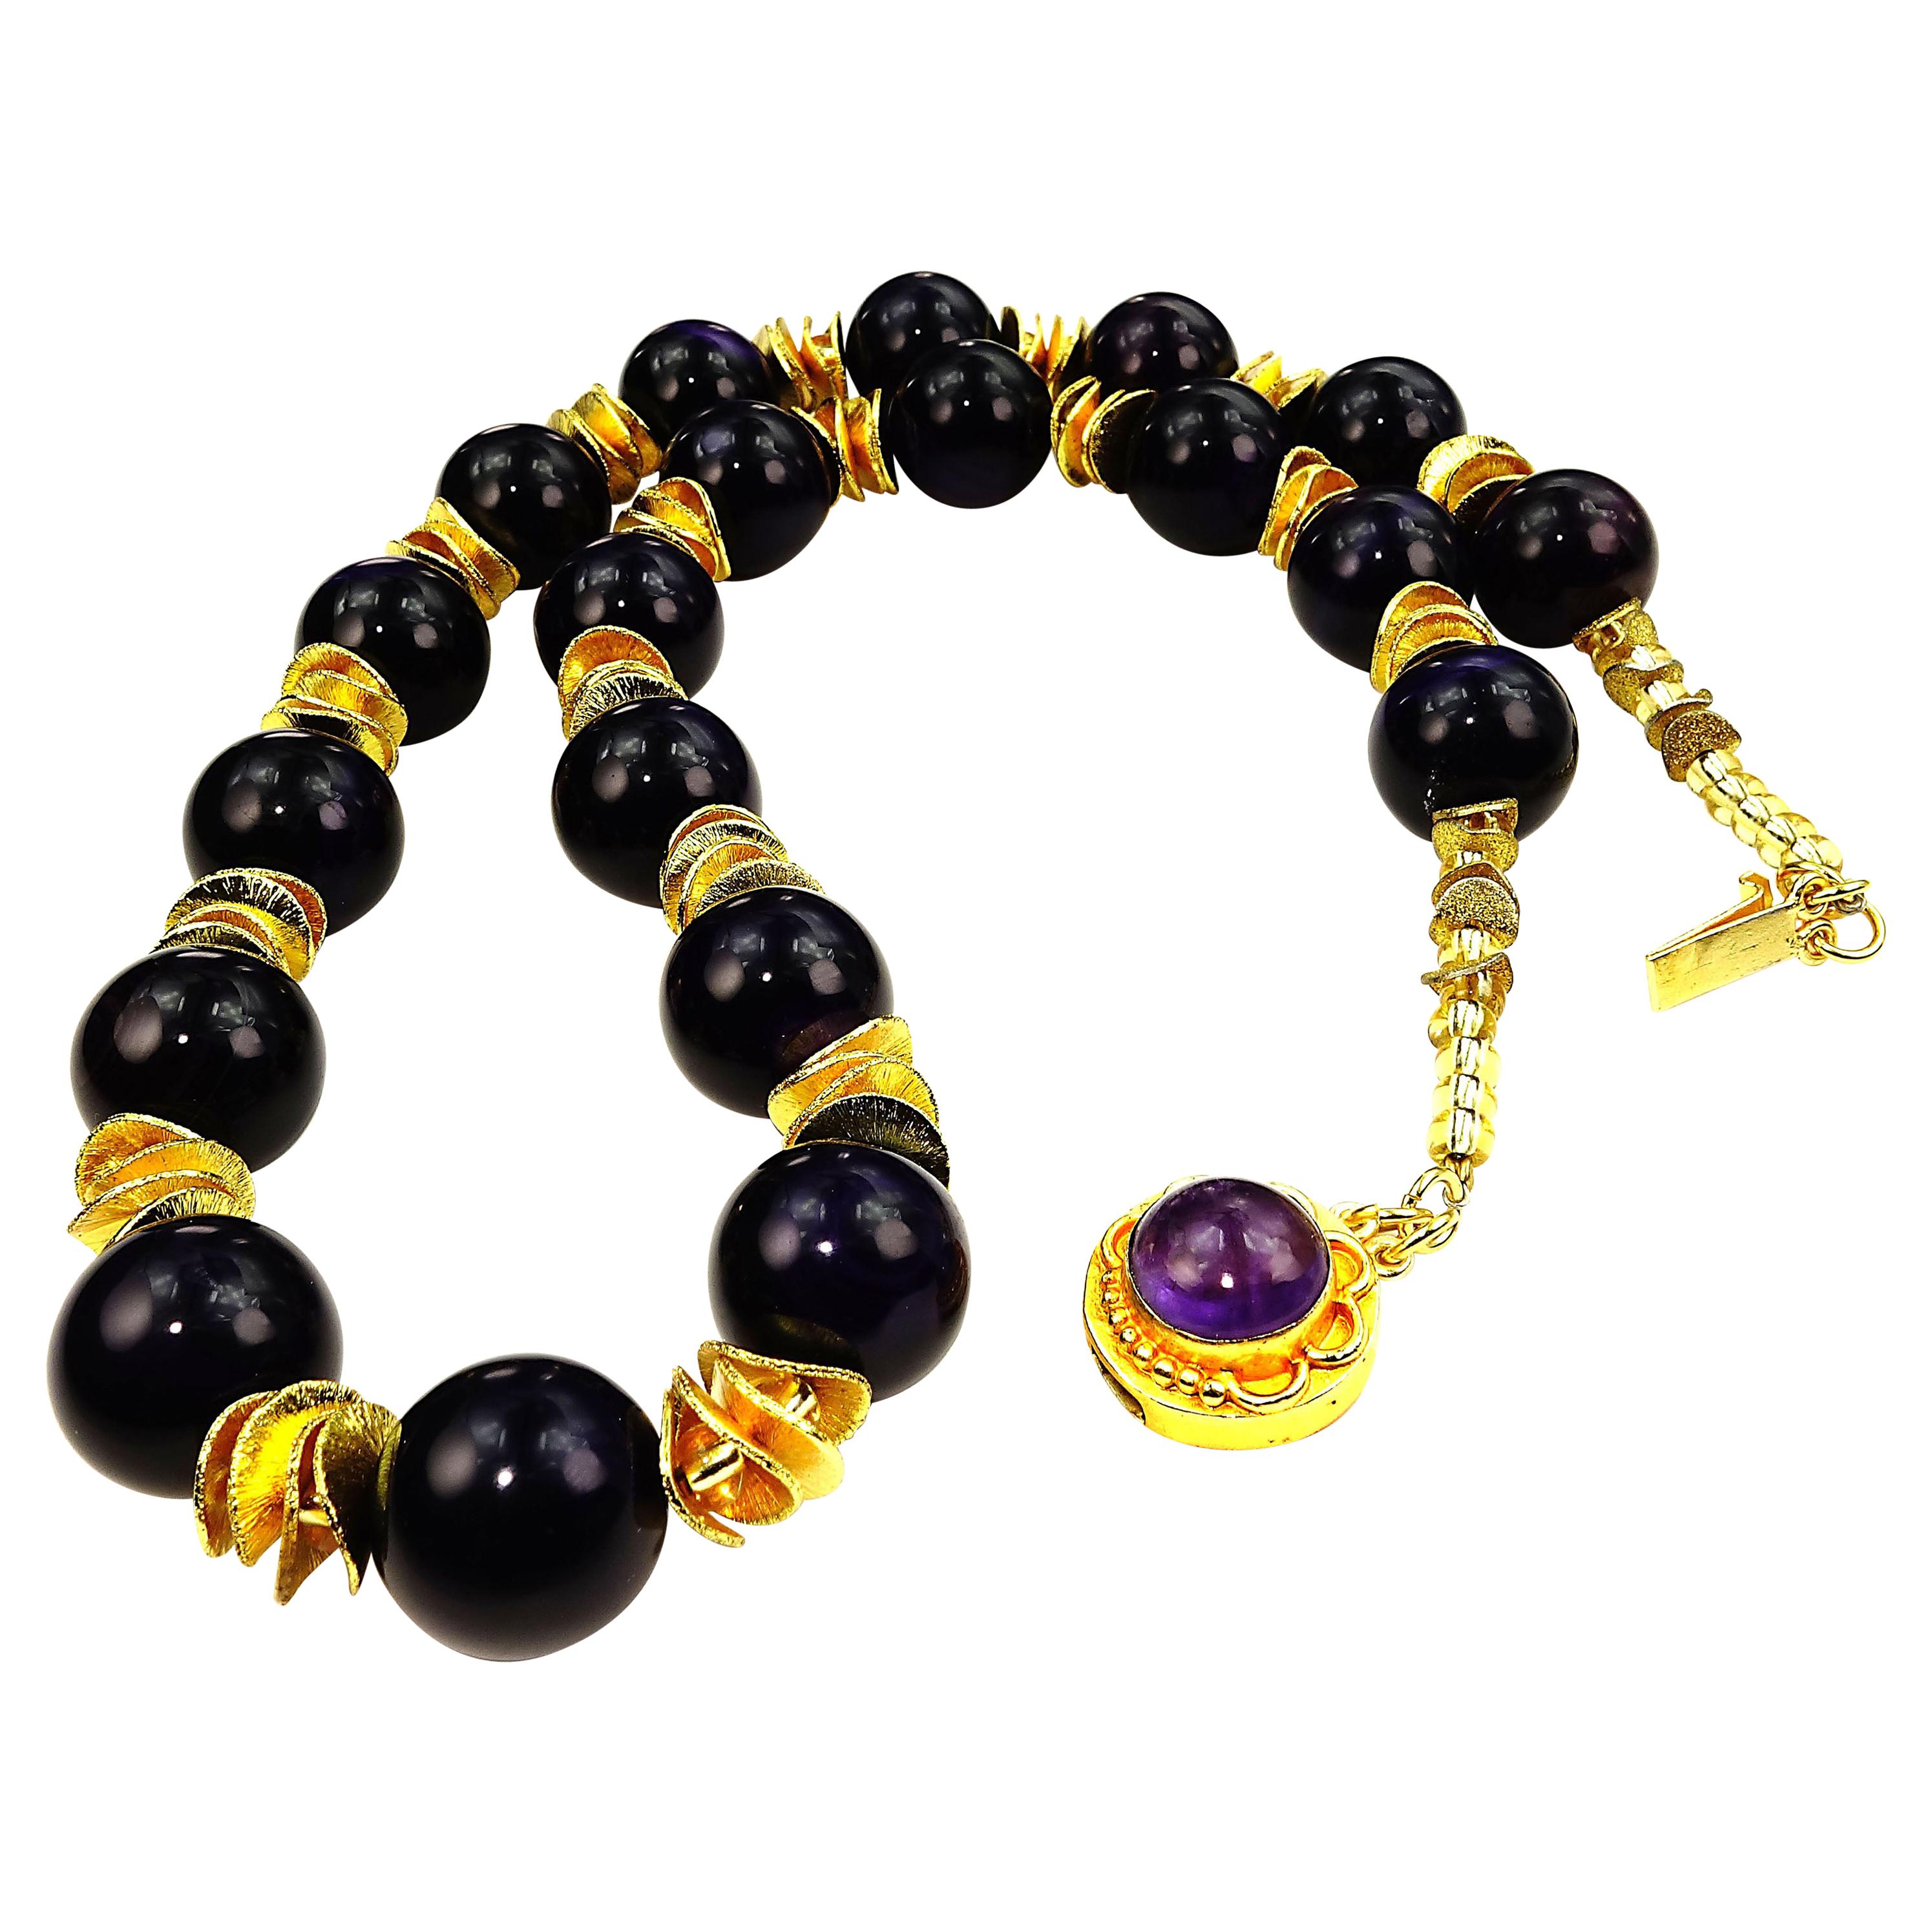 Bead AJD 23 Inch Necklace of Polished Amethyst with Gold Accents February Birthstone